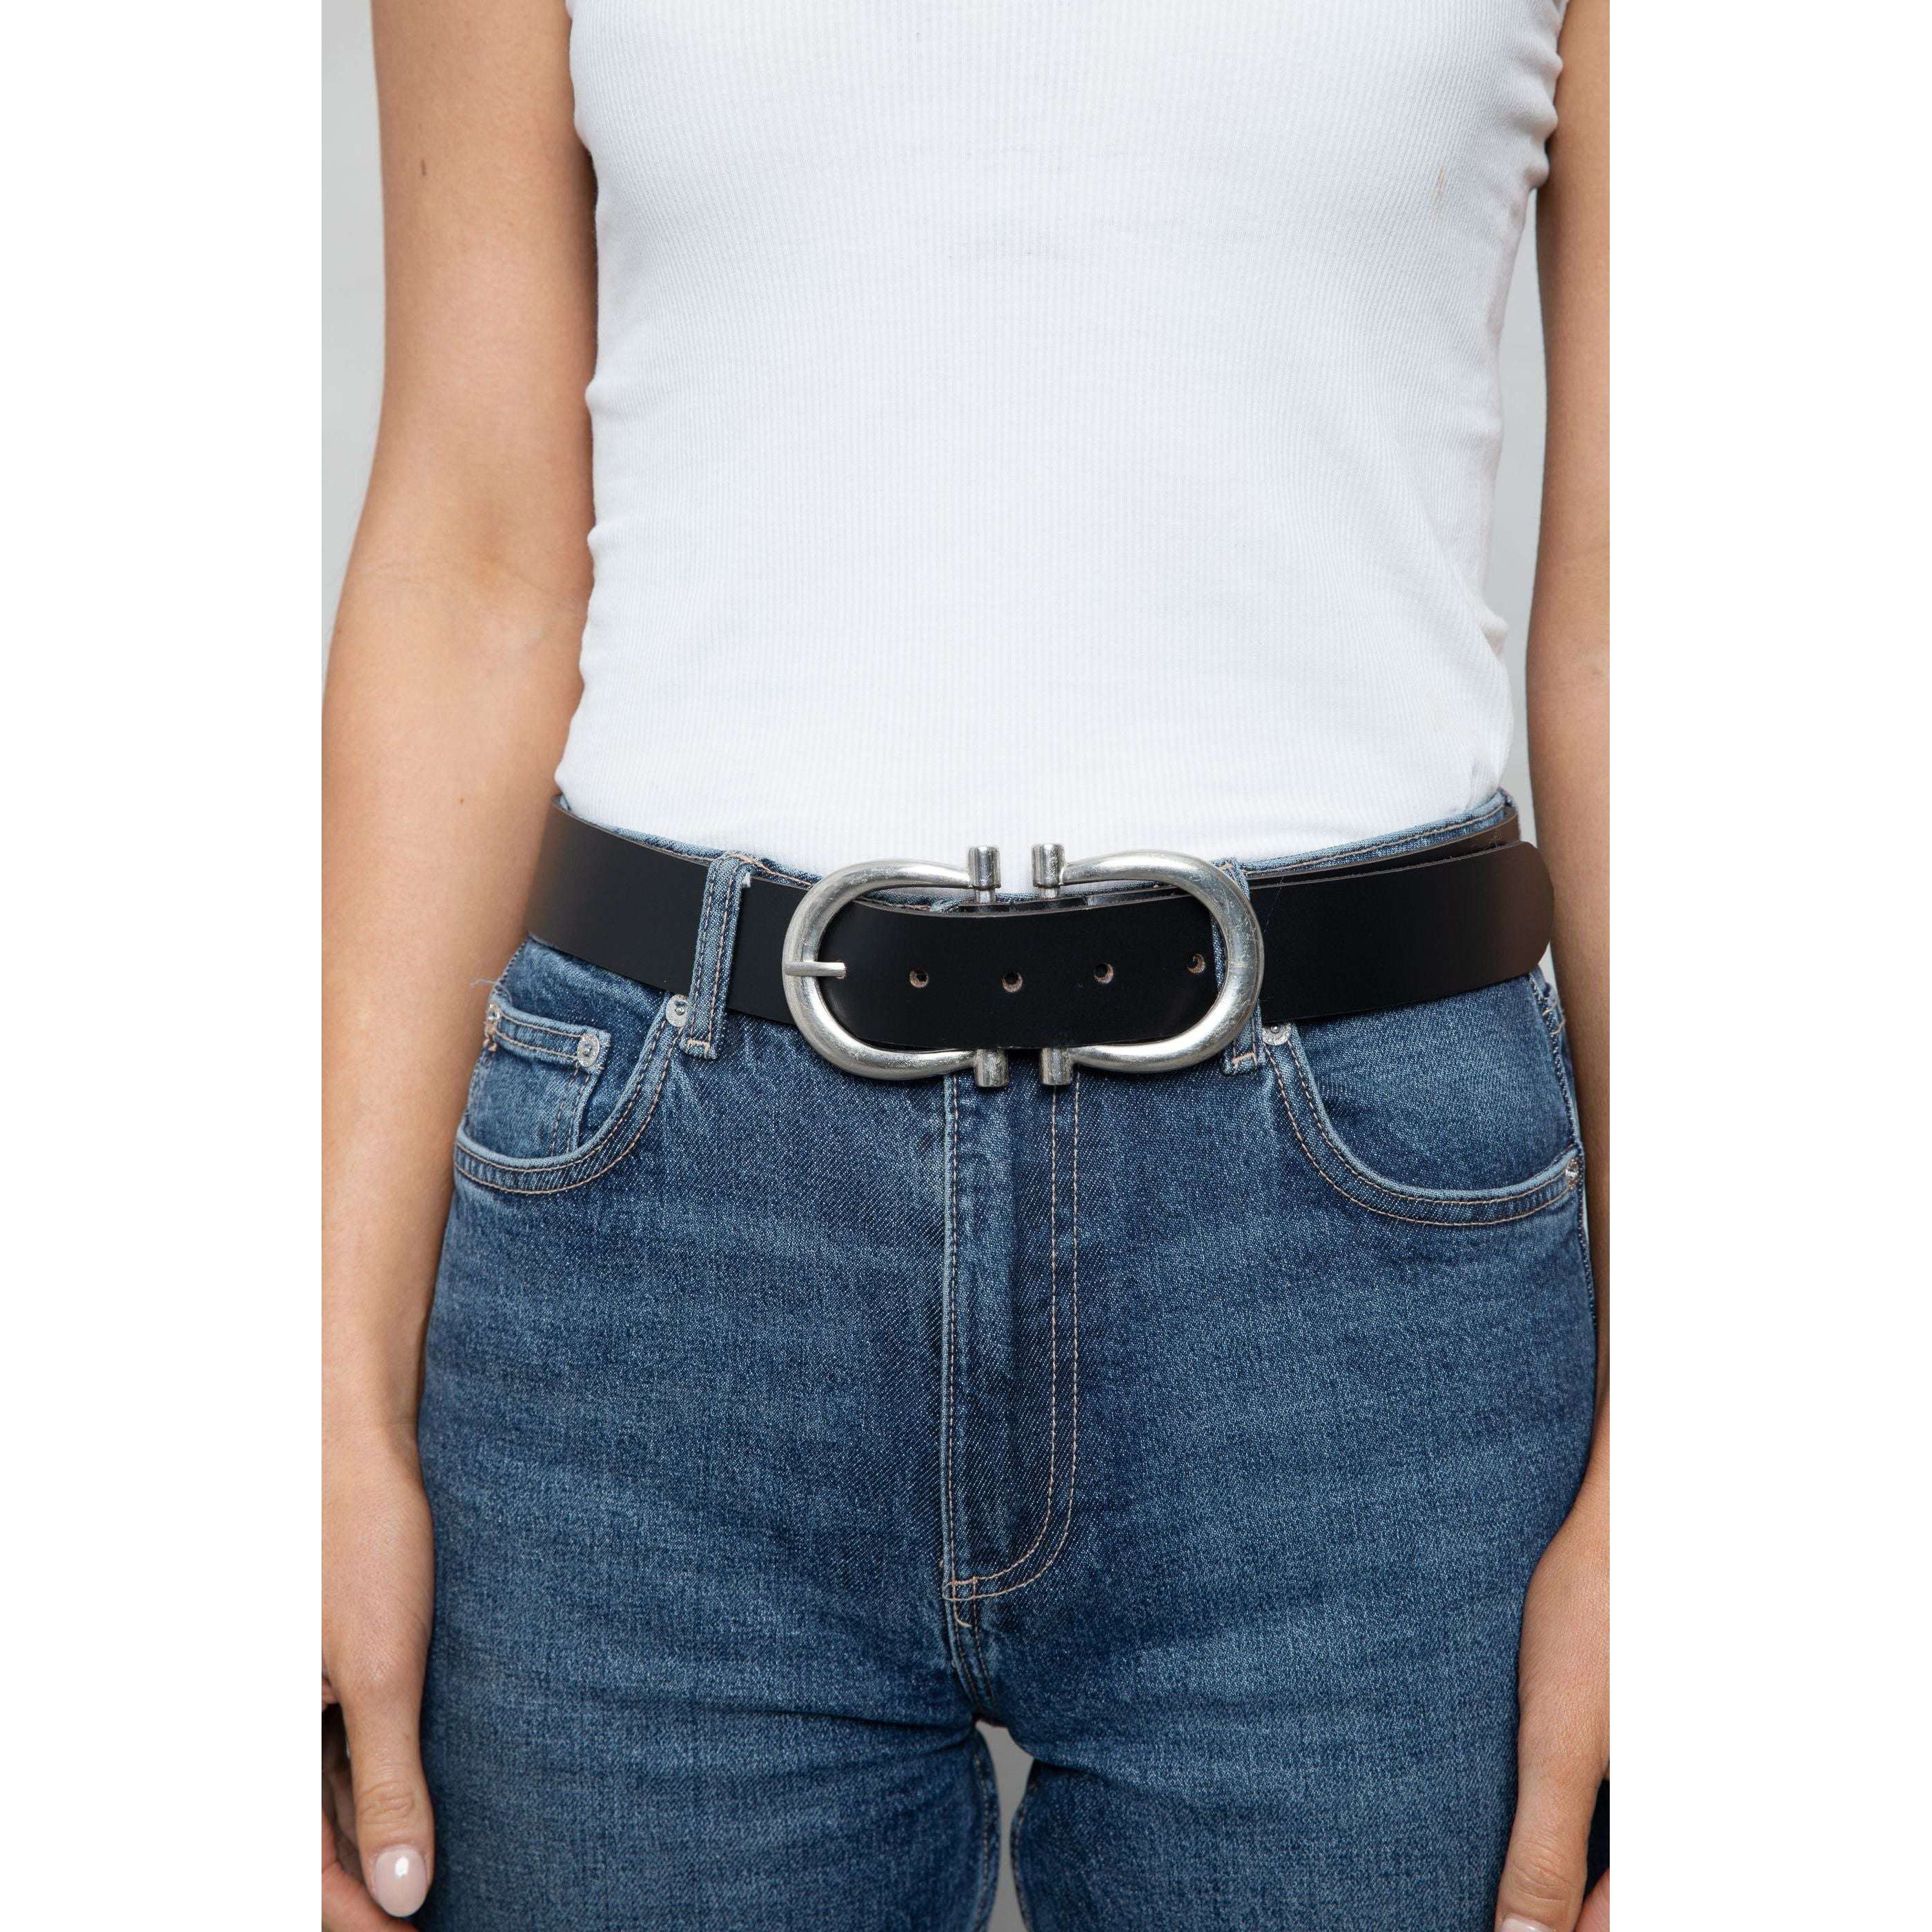 Impodimo Living & Giving:Hidden Valley Belt - Black:Holiday Trading & Co